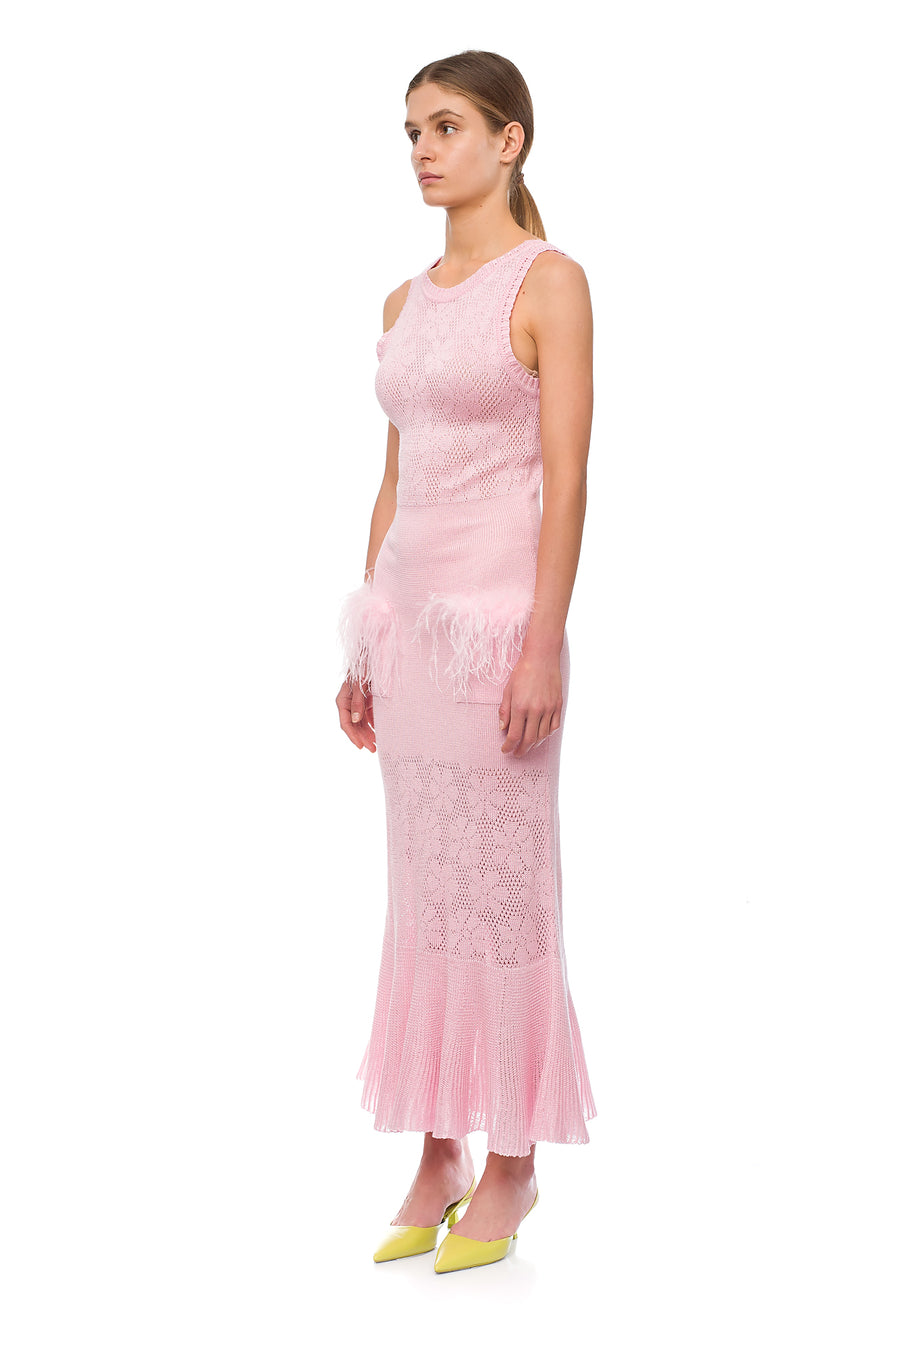 Champagne Rose Knit Dress With Feathers